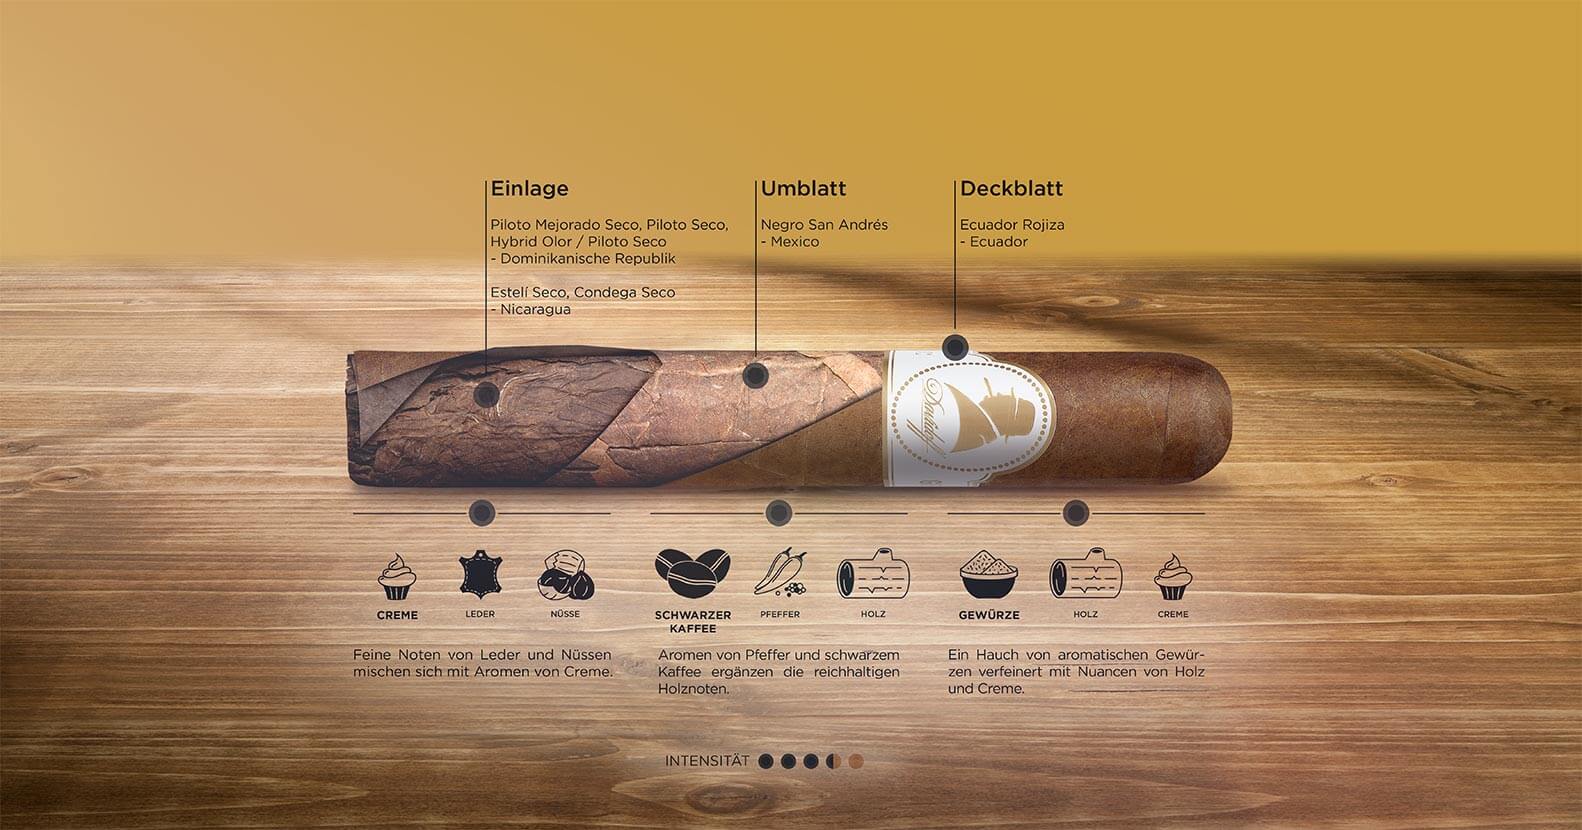 Infographic of a Davidoff Winston Churchill Original Series Cigar with all used tobaccos for the filler, binder and wrapper and detailed Taste explanation